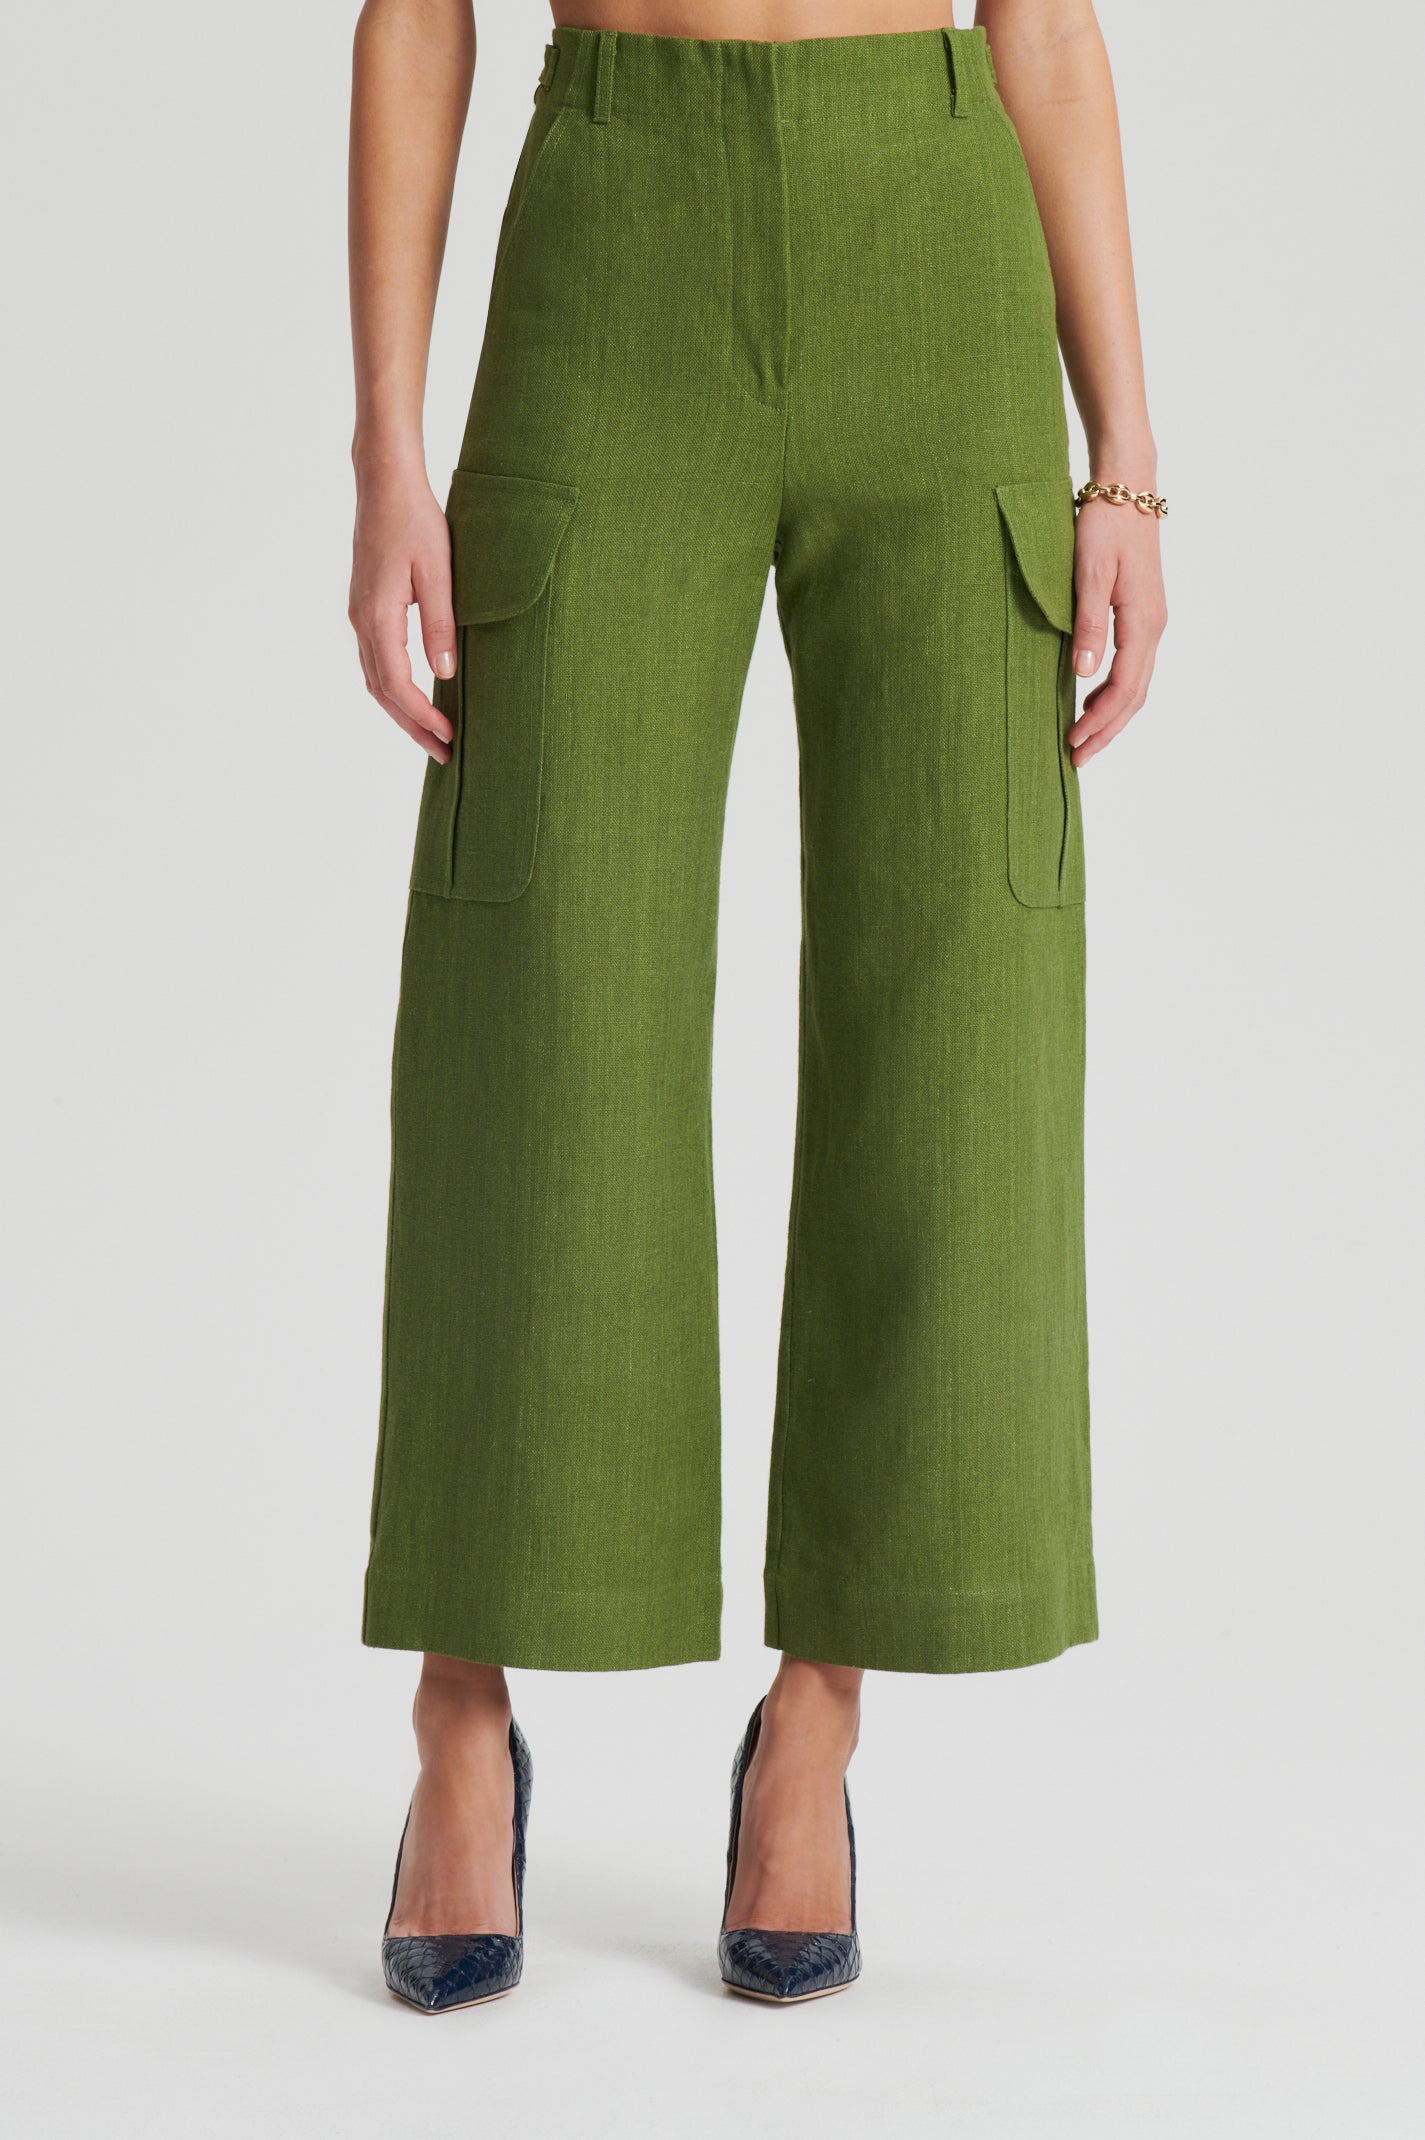 https://cdn.shopify.com/s/files/1/1899/4143/products/H3221397L-LINEN-CROPPED-CARGO-FOREST-SCANLANTHEODORE-3.jpg?v=1692688302